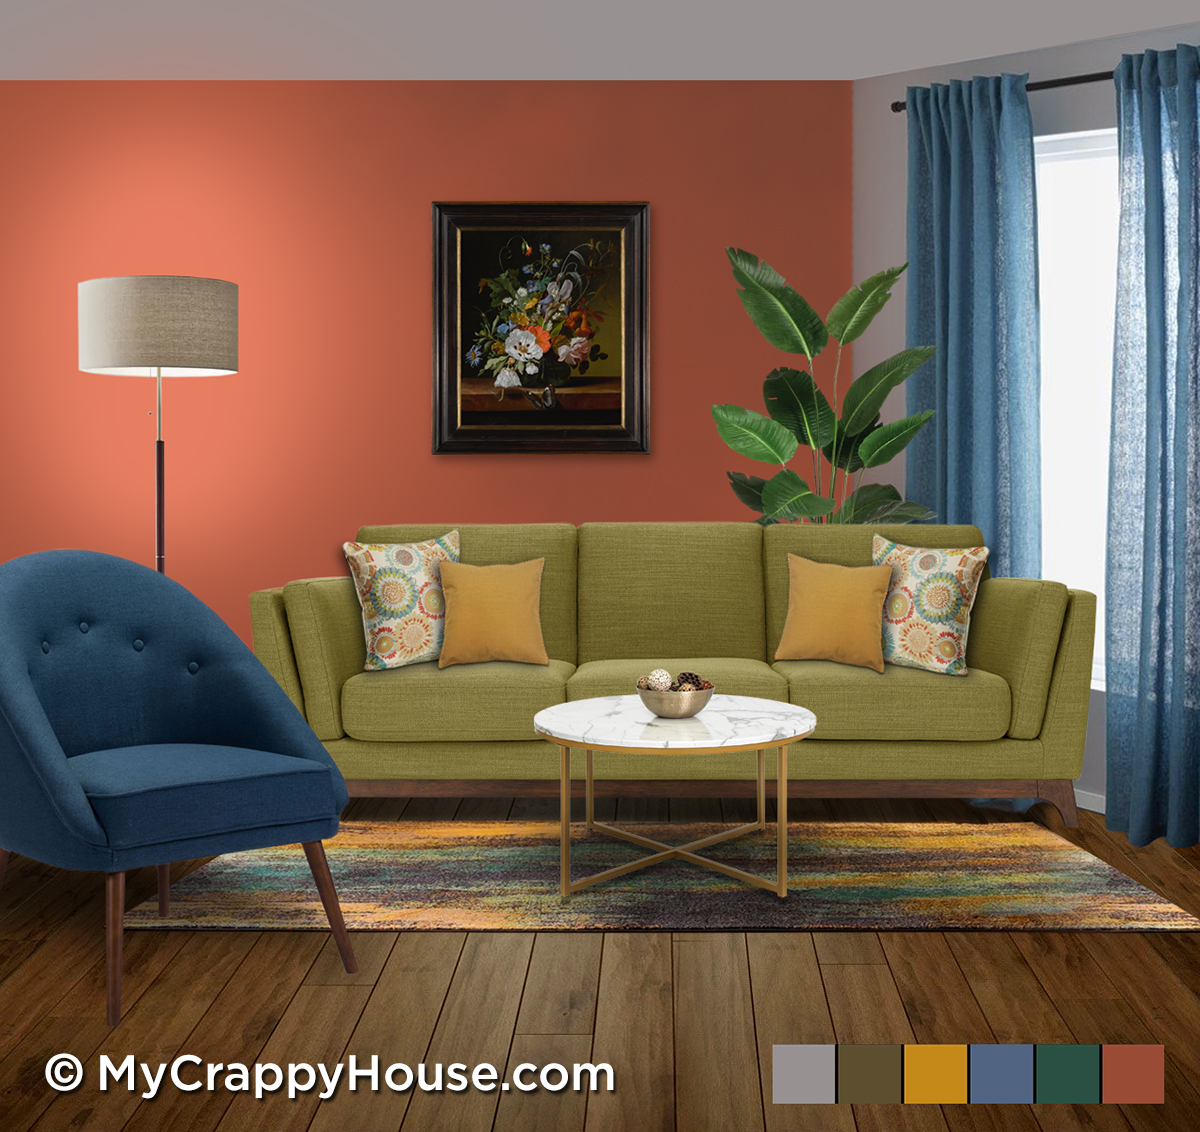 Choosing Room Colors From an Inspiration Piece